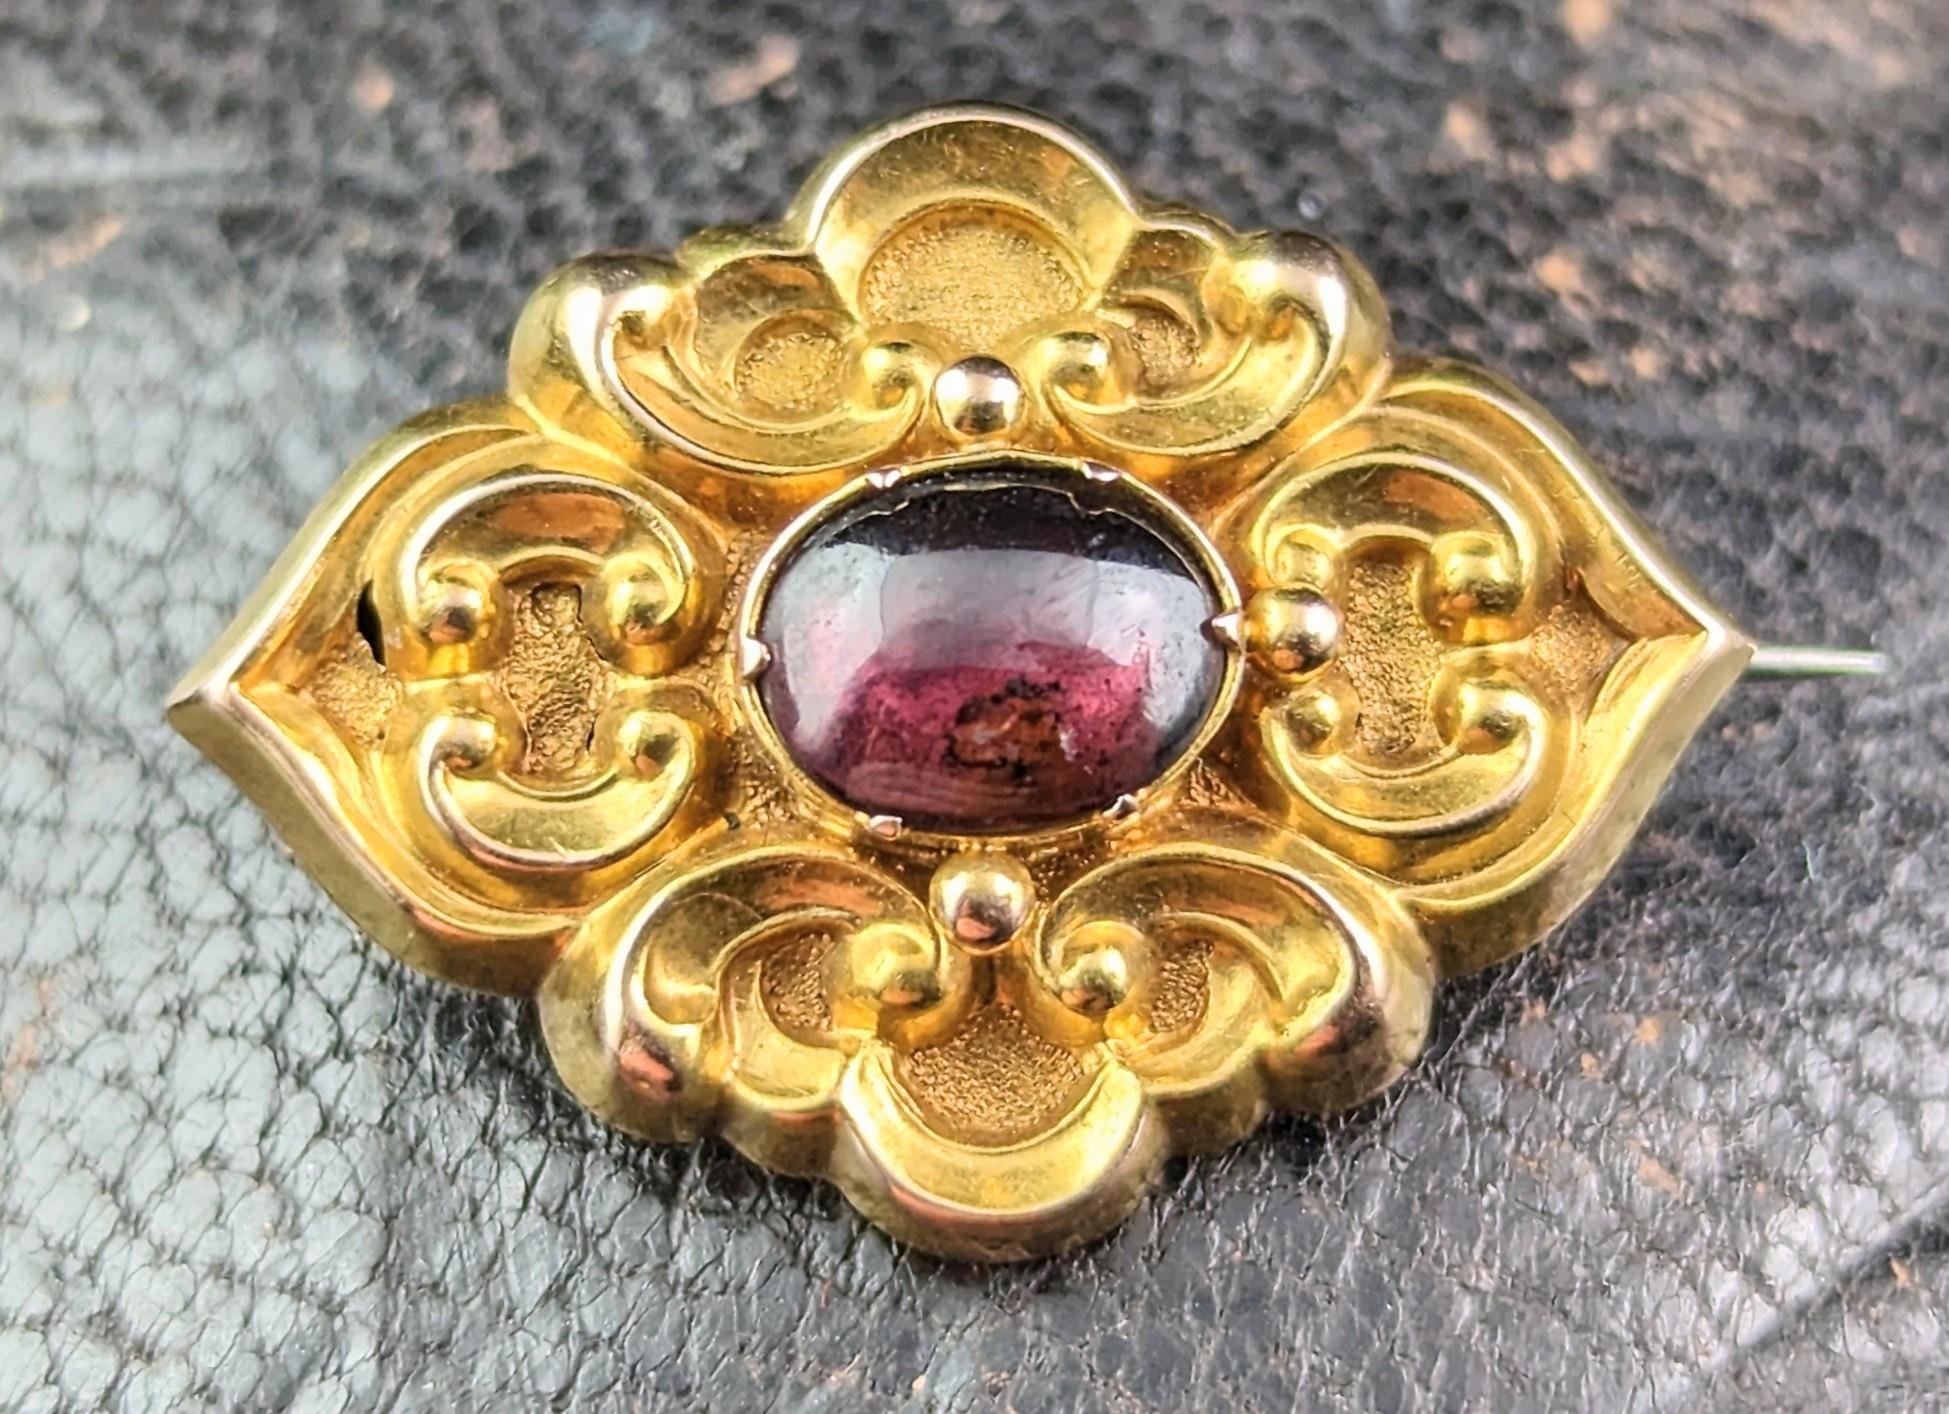 This antique Mid Victorian Garnet Cabochon mourning brooch is sumptuously beautiful.

Rich buttery 15kt bloomed yellow gold, the repousse scrollwork front housing a big juicy red garnet cabochon to the centre.

To the verso the brooch has an